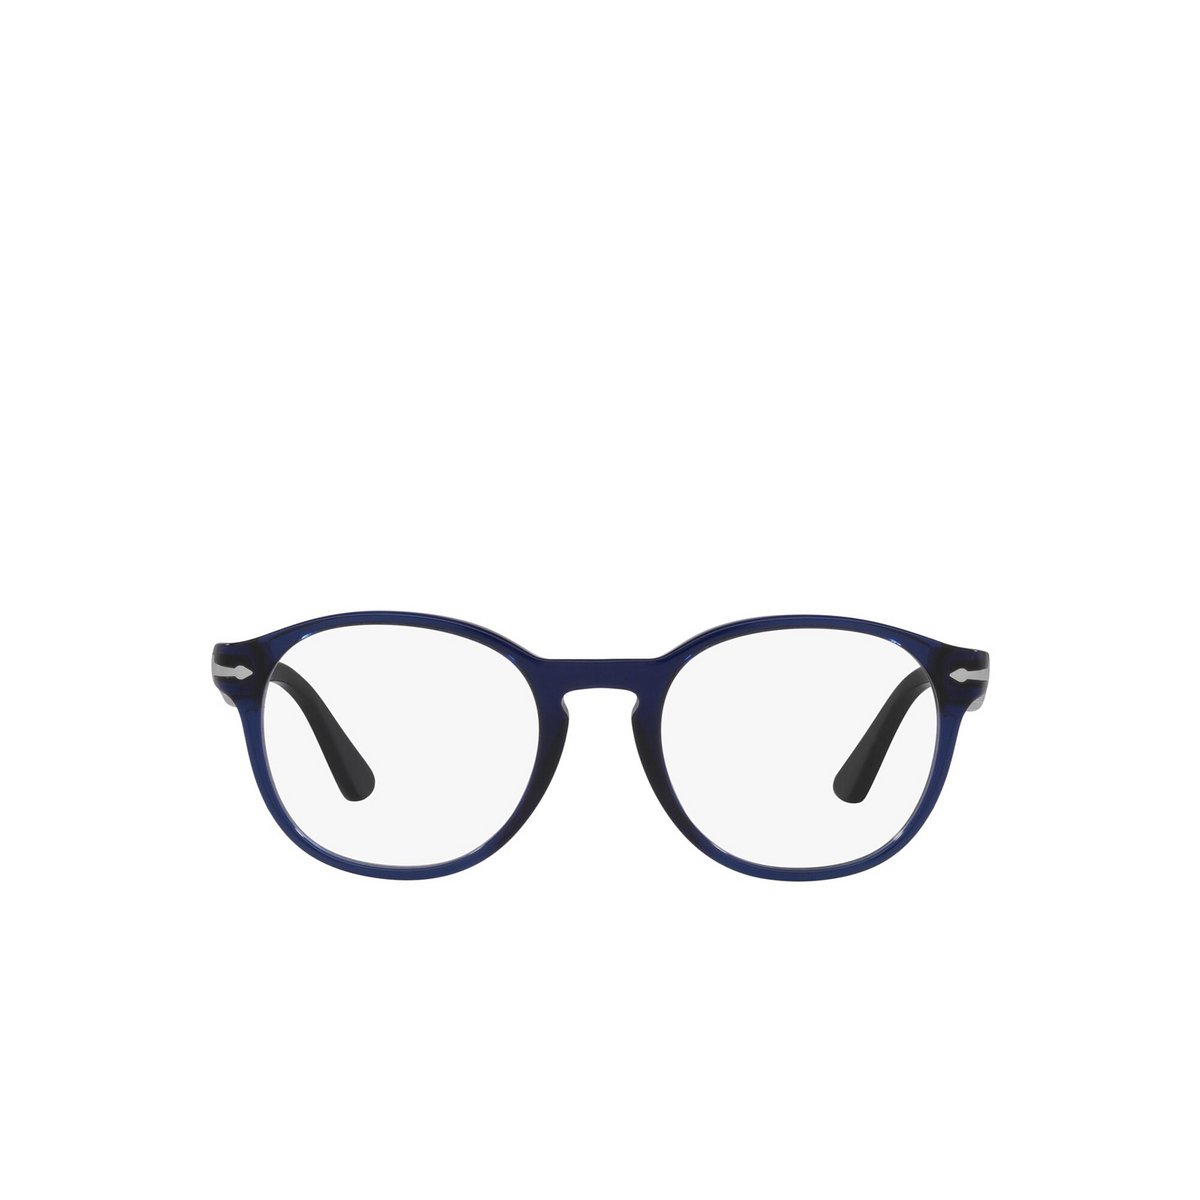 Persol® Round Eyeglasses: PO3284V color Blue 181 - front view.